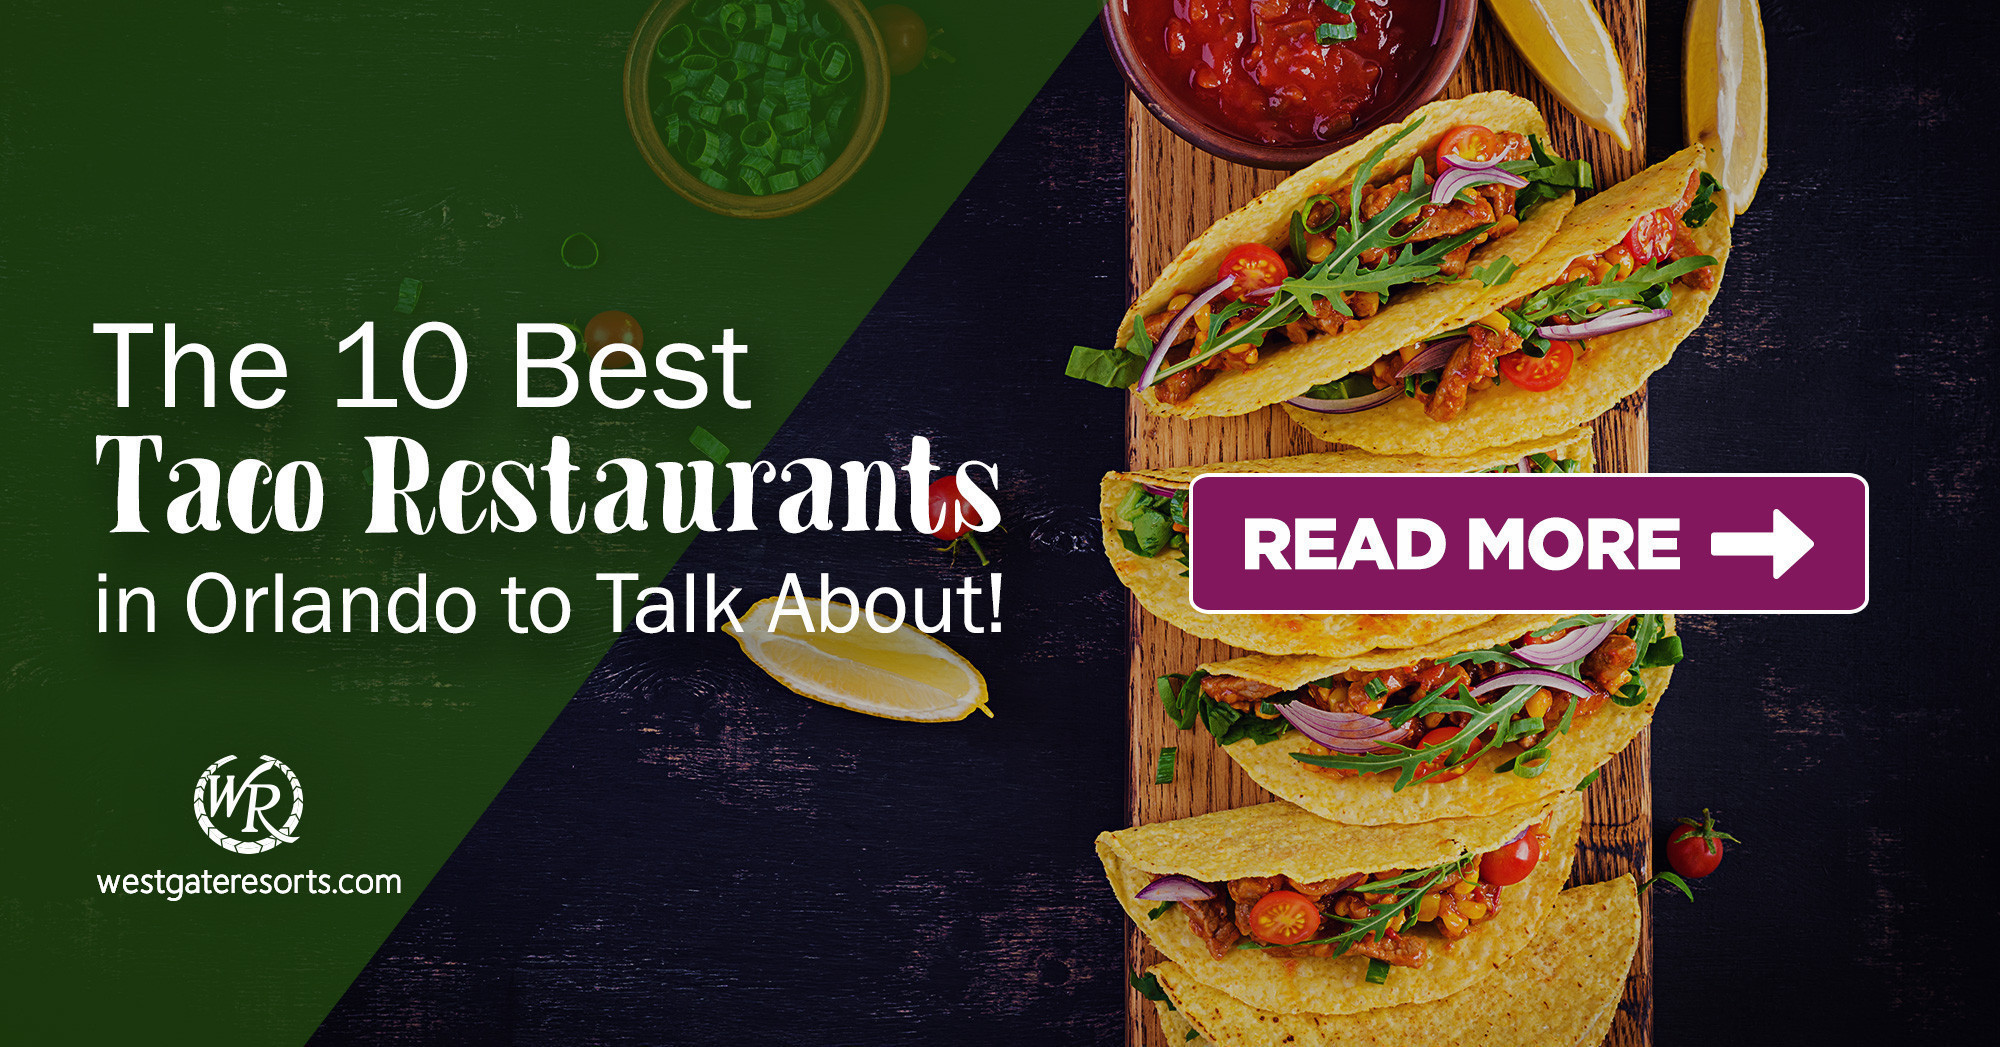 The 10 Best Taco Restaurants in Orlando to Taco Bout (Talk About!)